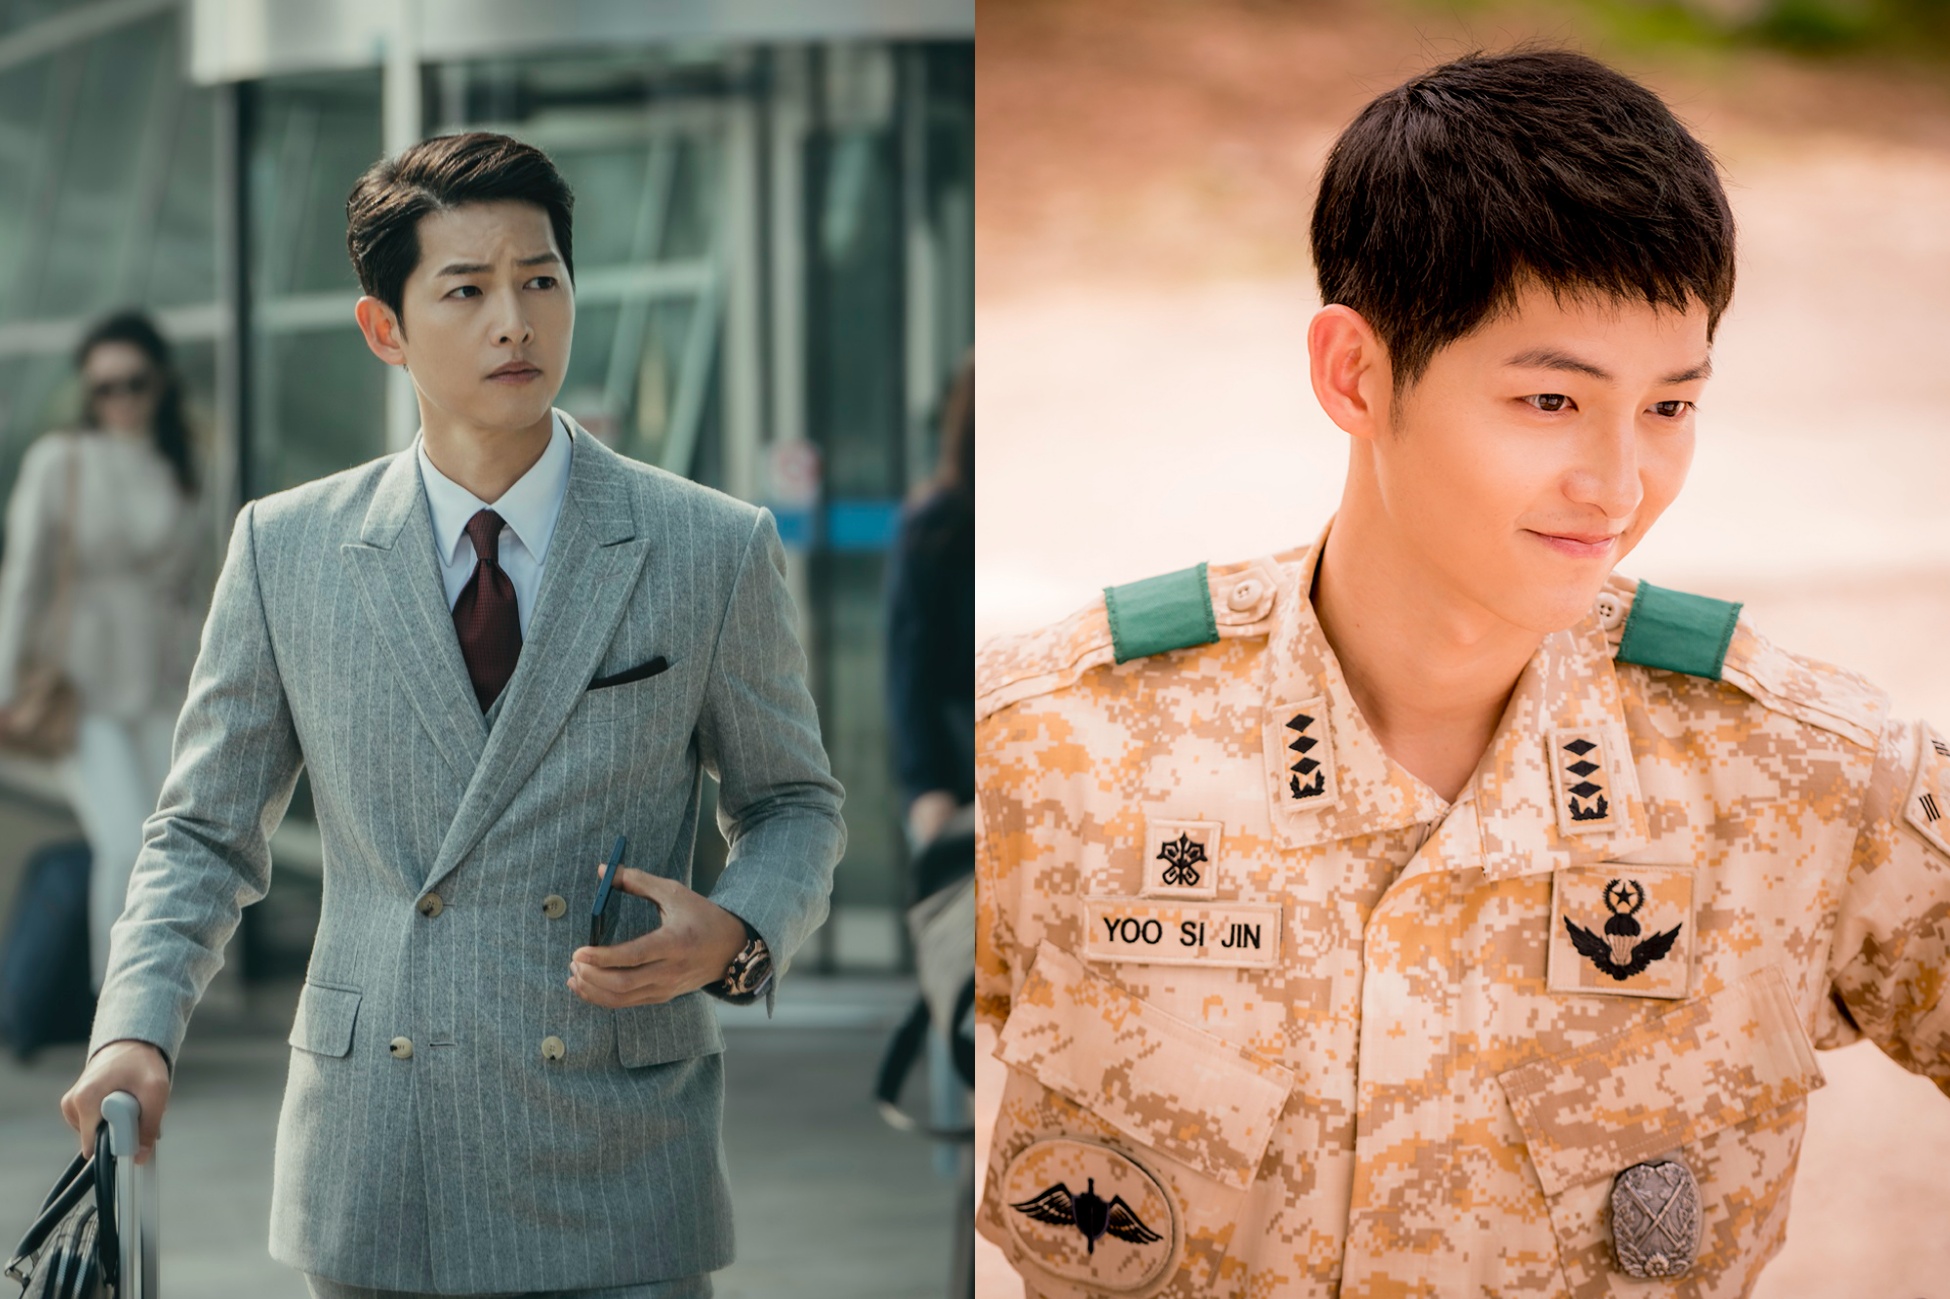 Let's Get to Know the Cast and Characters in the Drama VINCENZO, Get Ready to Fall in Love with Song Joong Ki